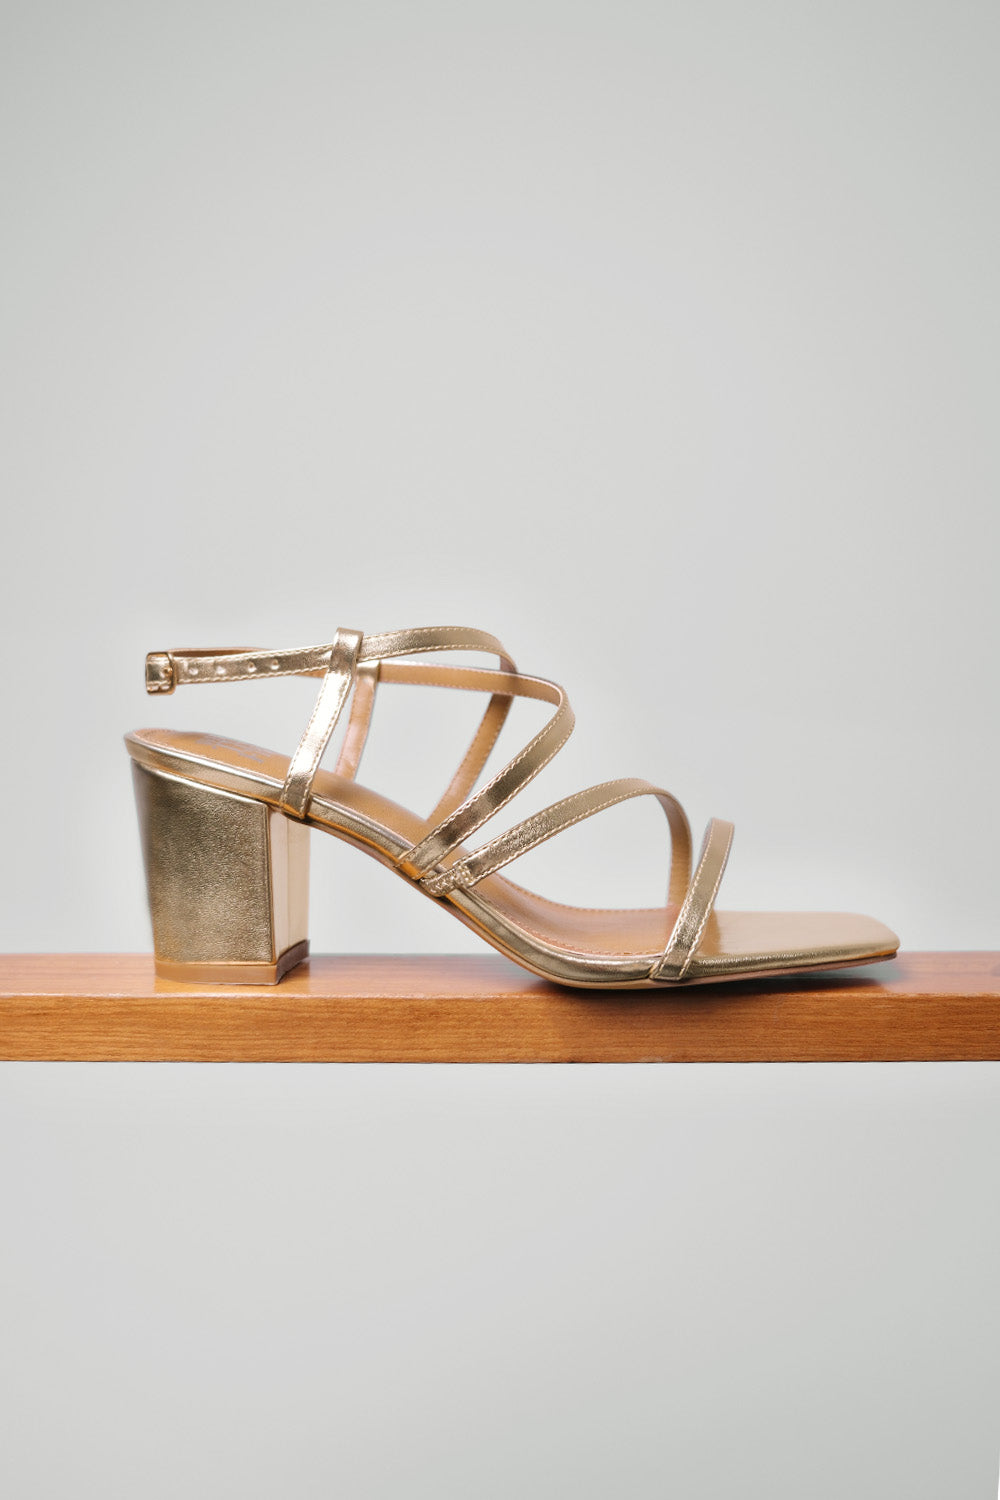 SIDRA MID HIGH BLOCK HEEL SANDALS WITH CROSS OVER STRAP IN GOLD METALLIC FAUX LEATHER